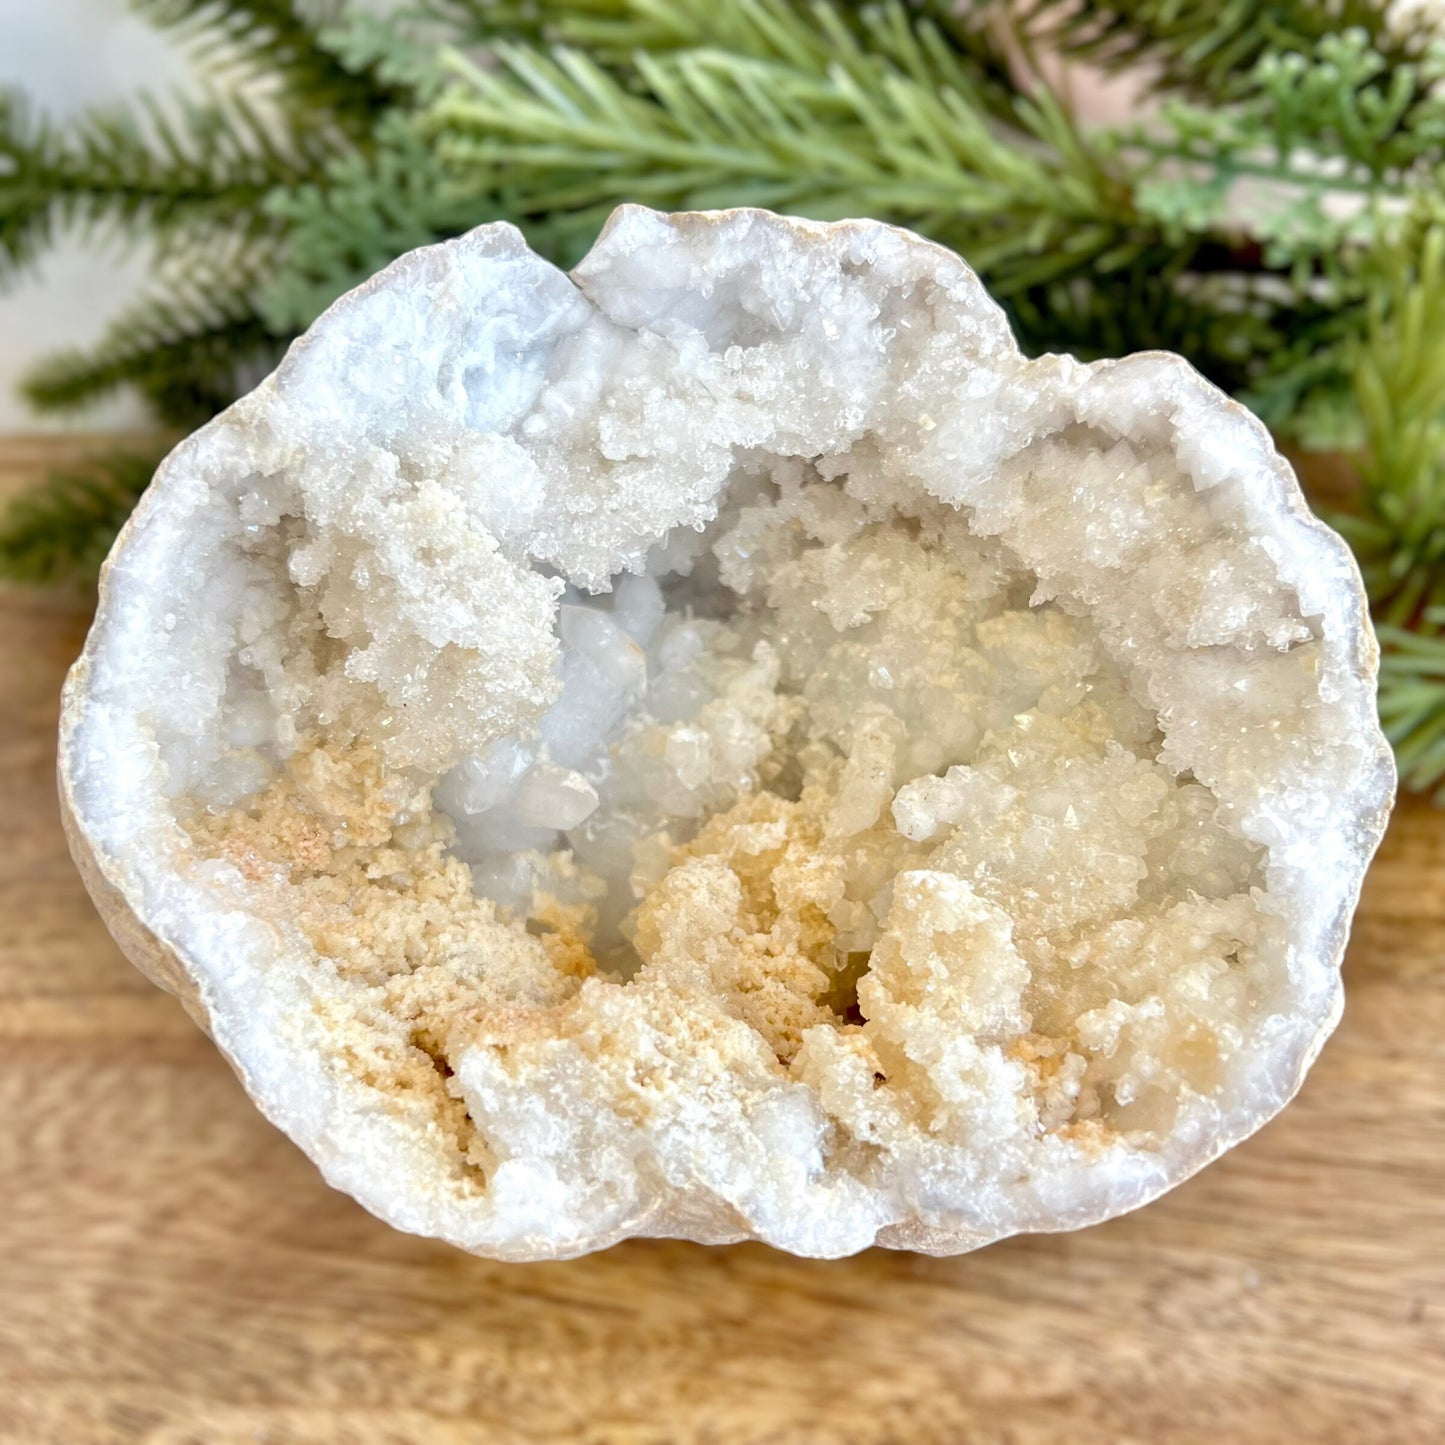 Image of a large Quartz sugar geode from Morocco. Has a sandy beige exterior, and lots of small, white crystals on the inside. Has some pale yellow iron staining on some crystals